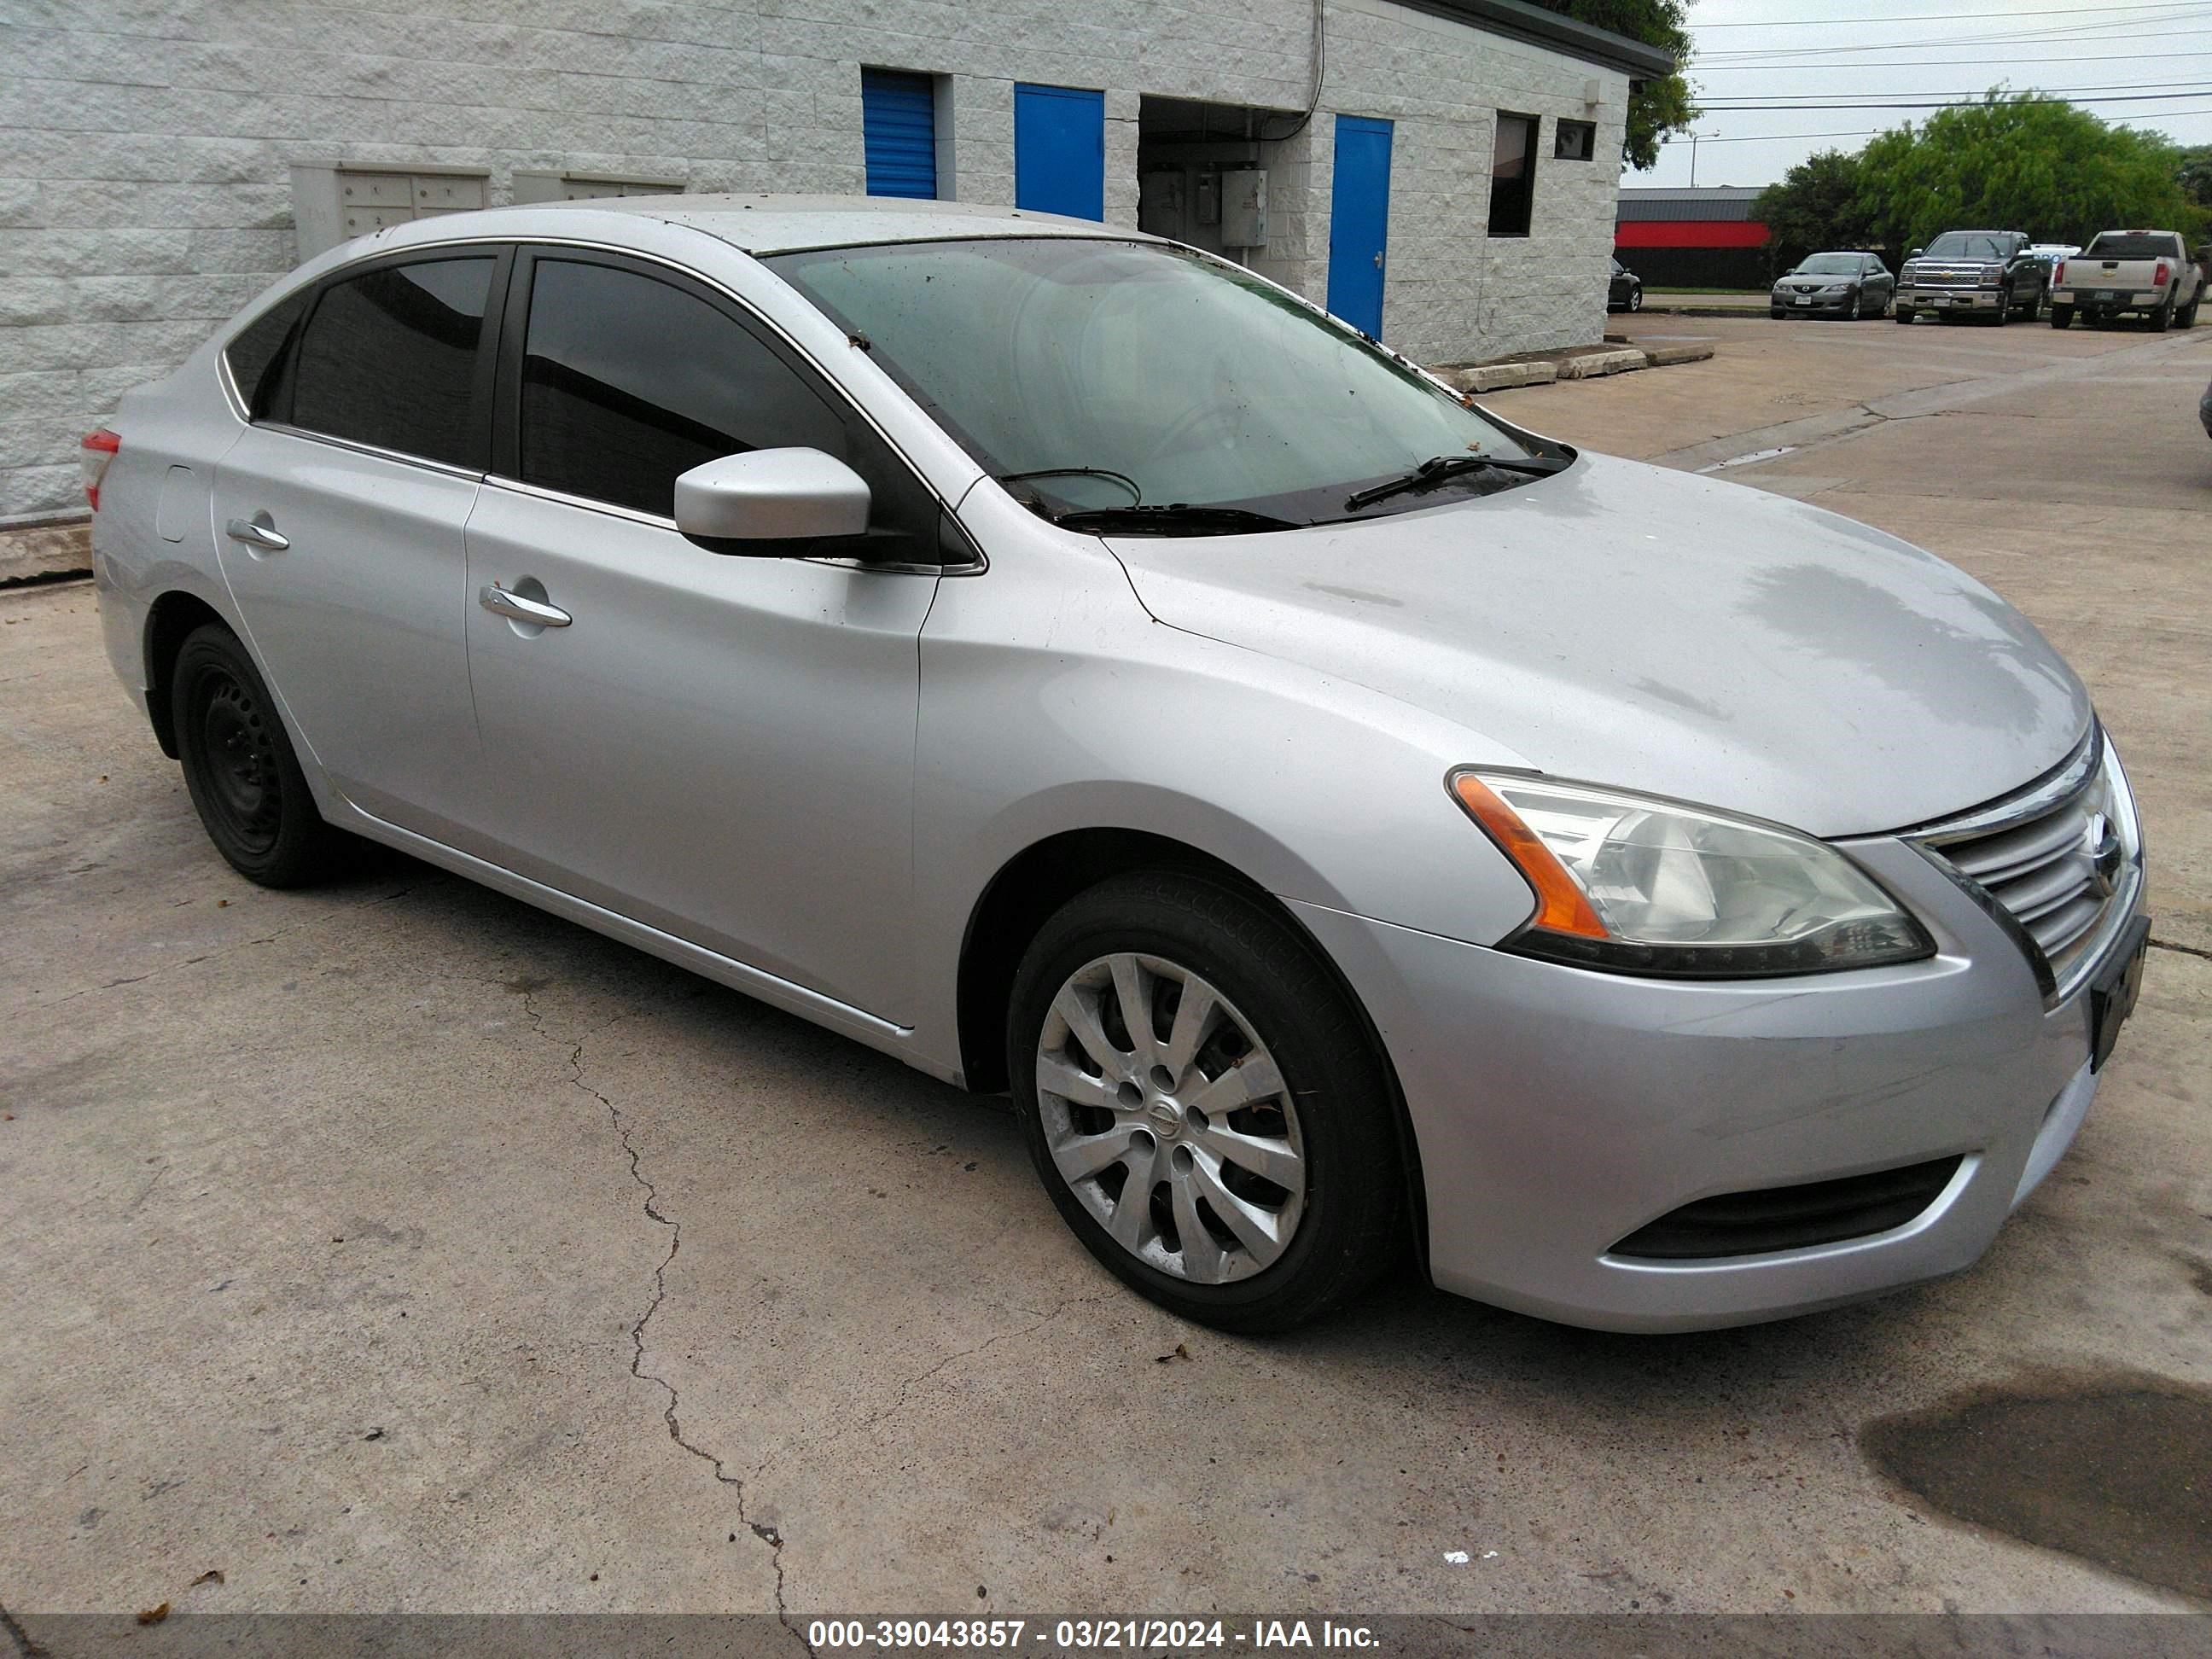 vin: 3N1AB7AP3FY239207 3N1AB7AP3FY239207 2015 nissan sentra 1800 for Sale in 78520, 1575 Military Rd, Brownsville, Texas, USA